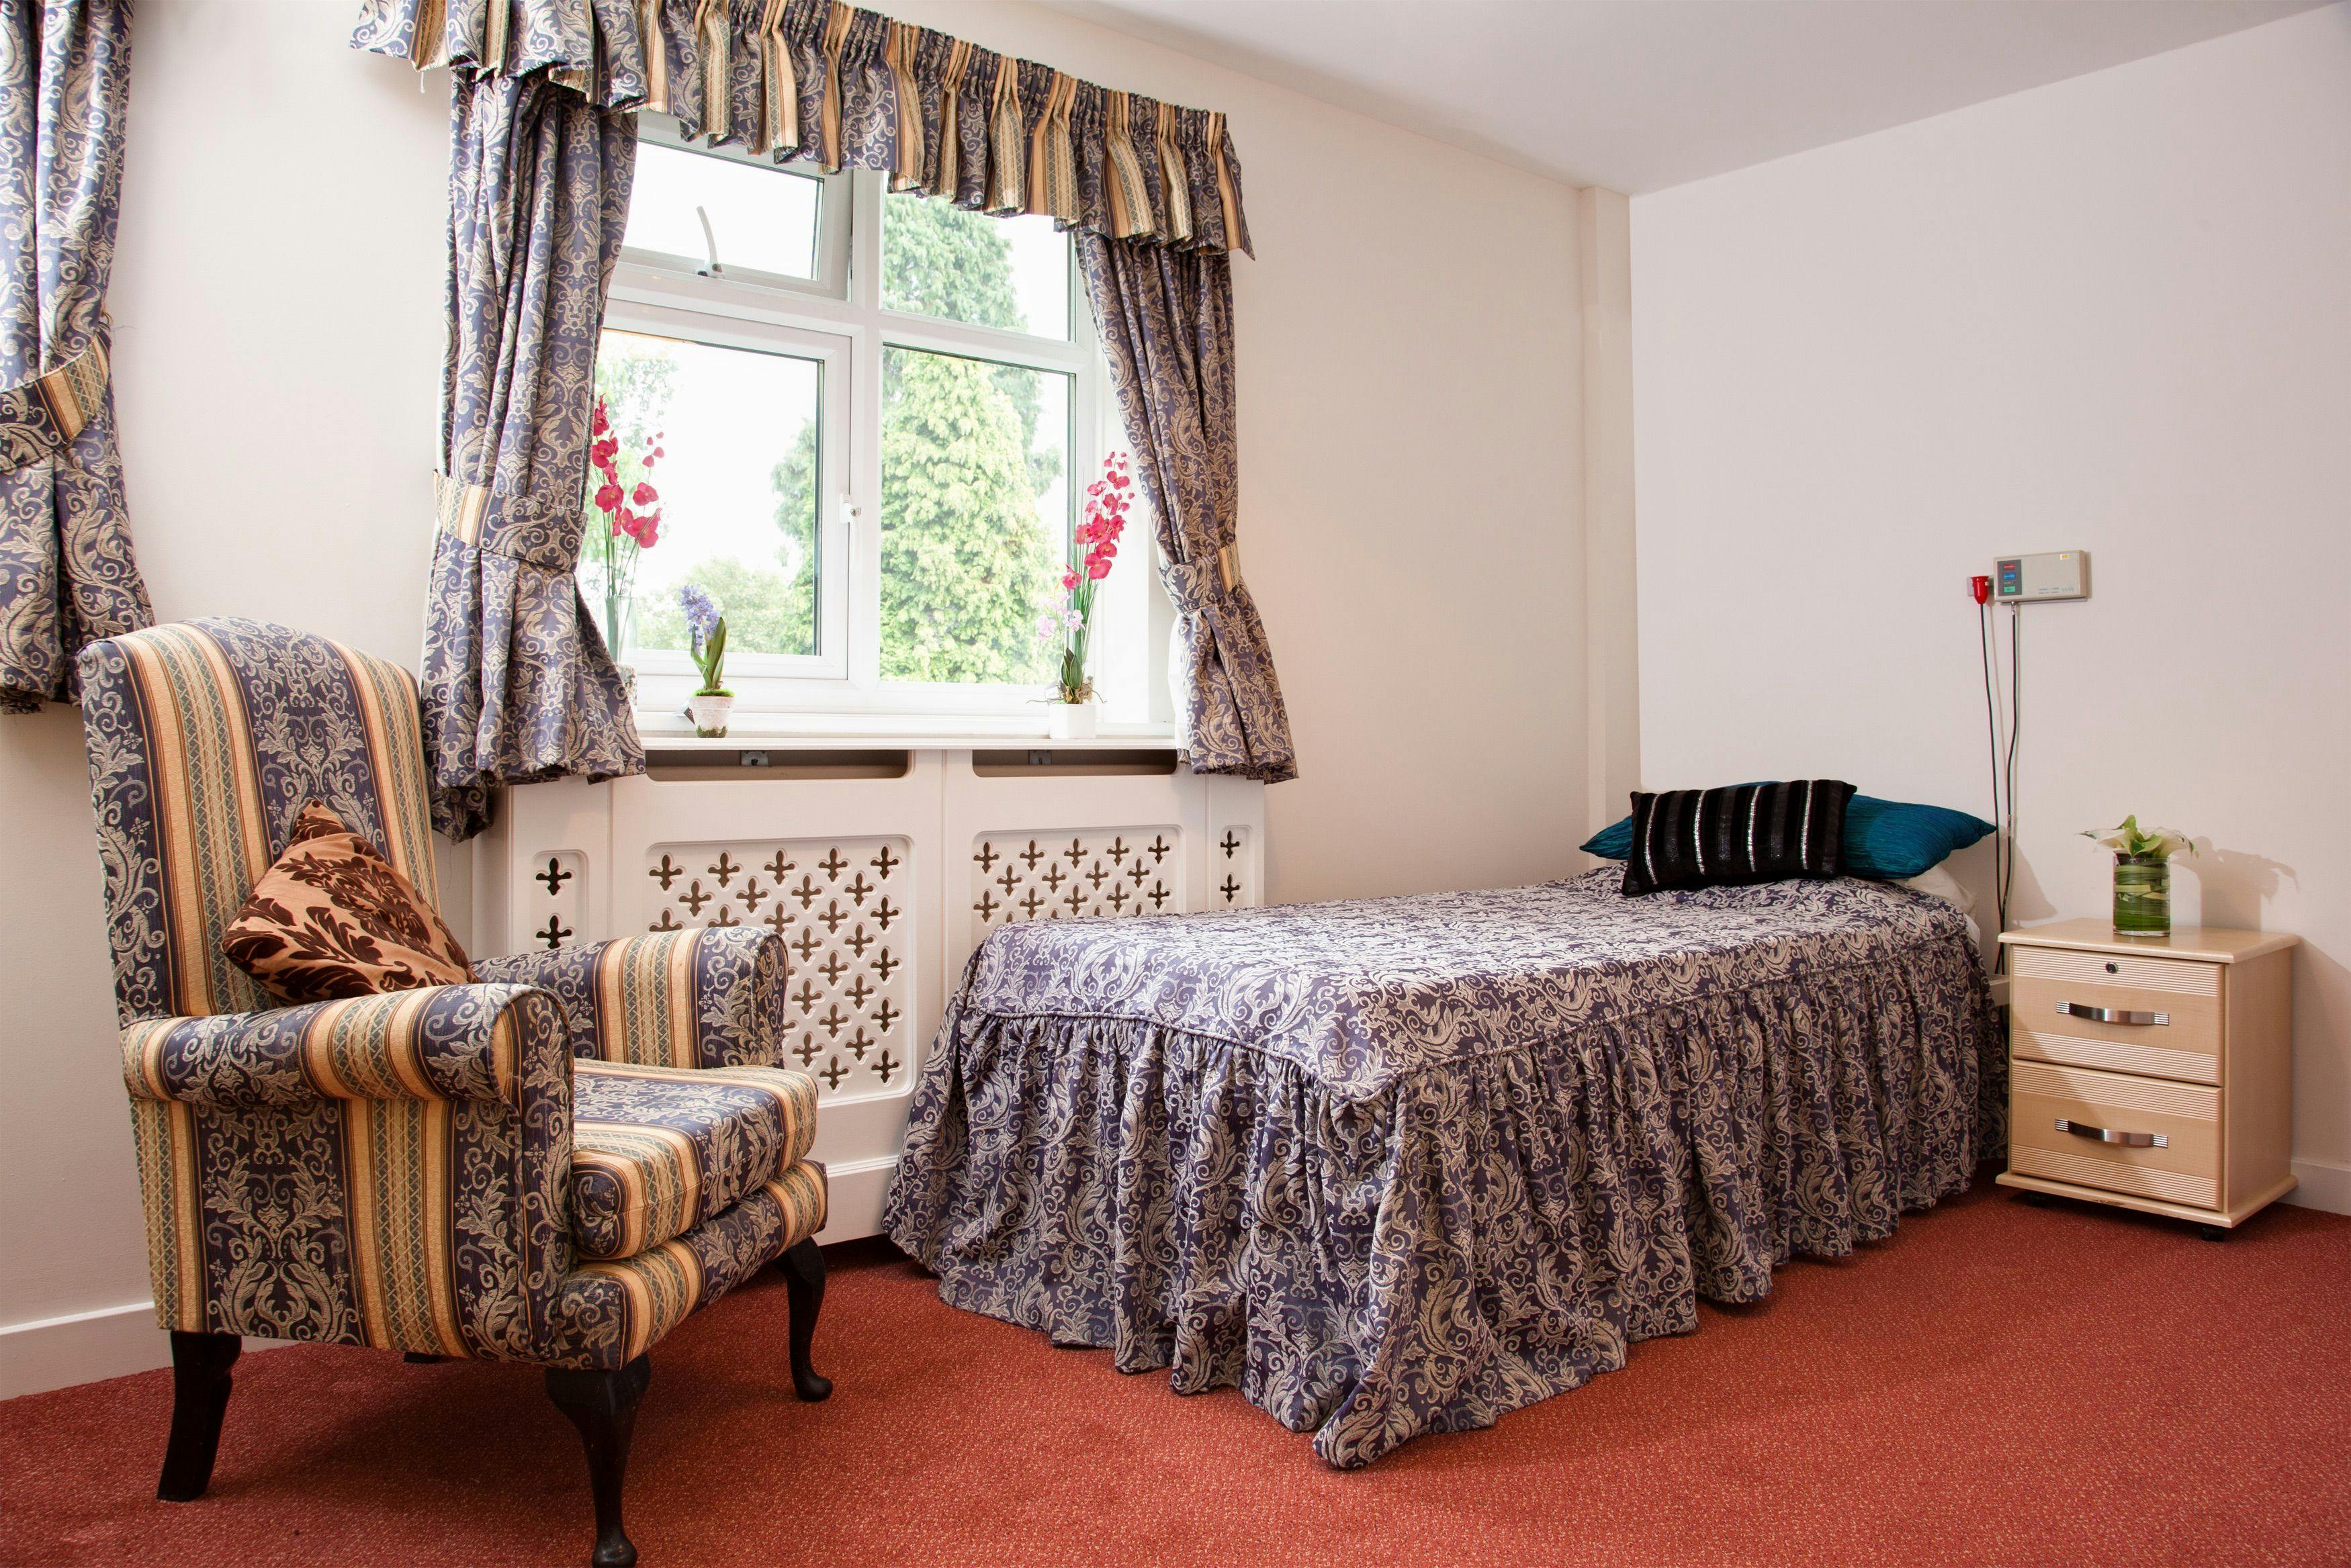 Surrey Heights Care Home in Wormley 5